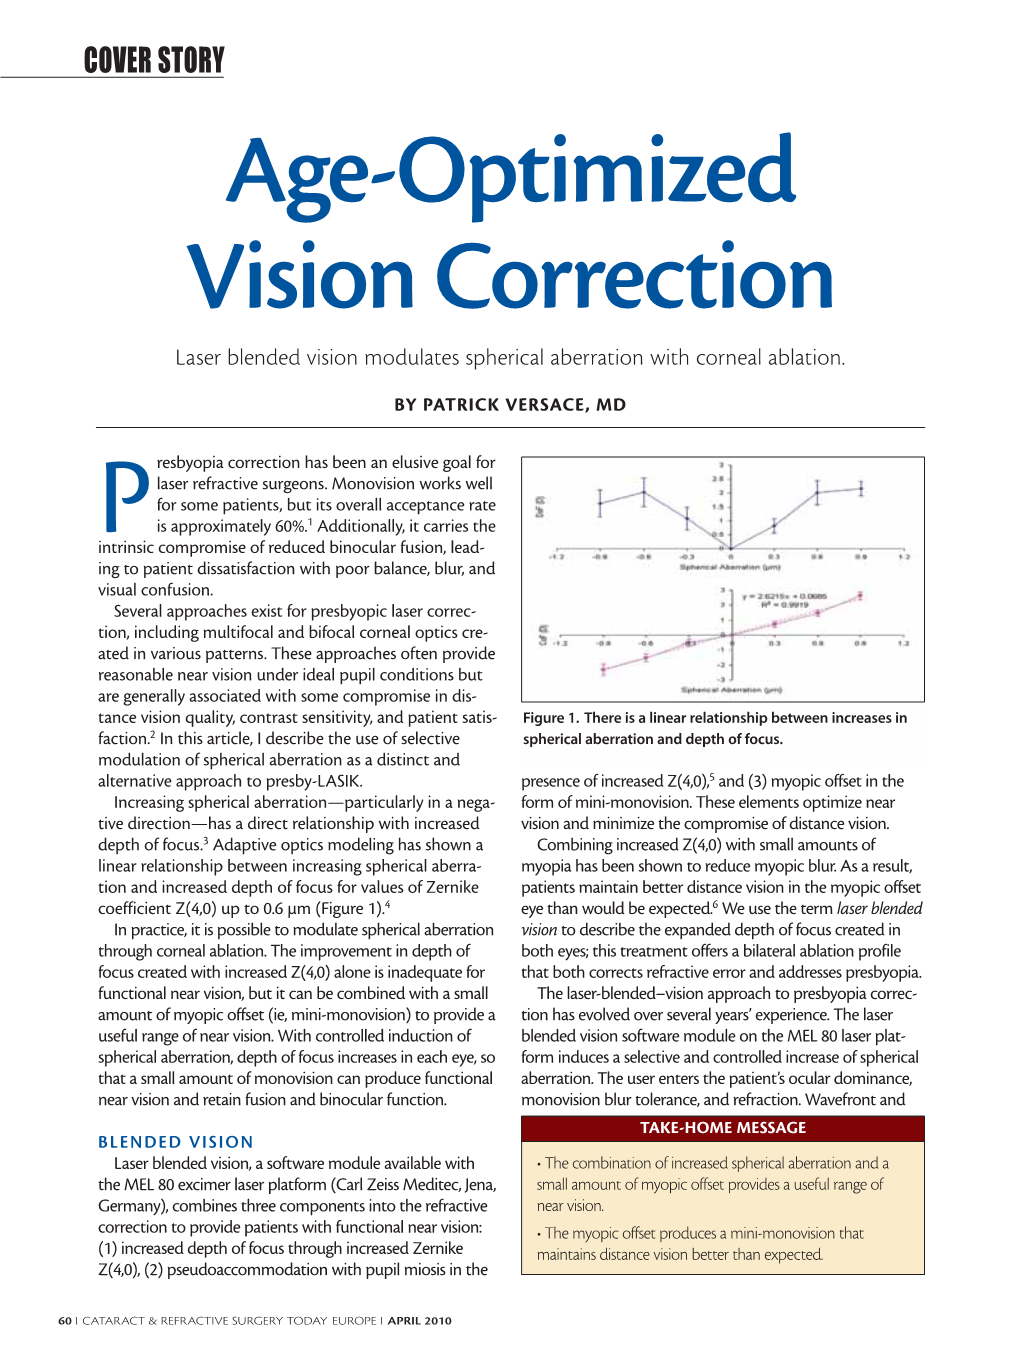 Age-Optimized Vision Correction Laser Blended Vision Modulates Spherical Aberration with Corneal Ablation